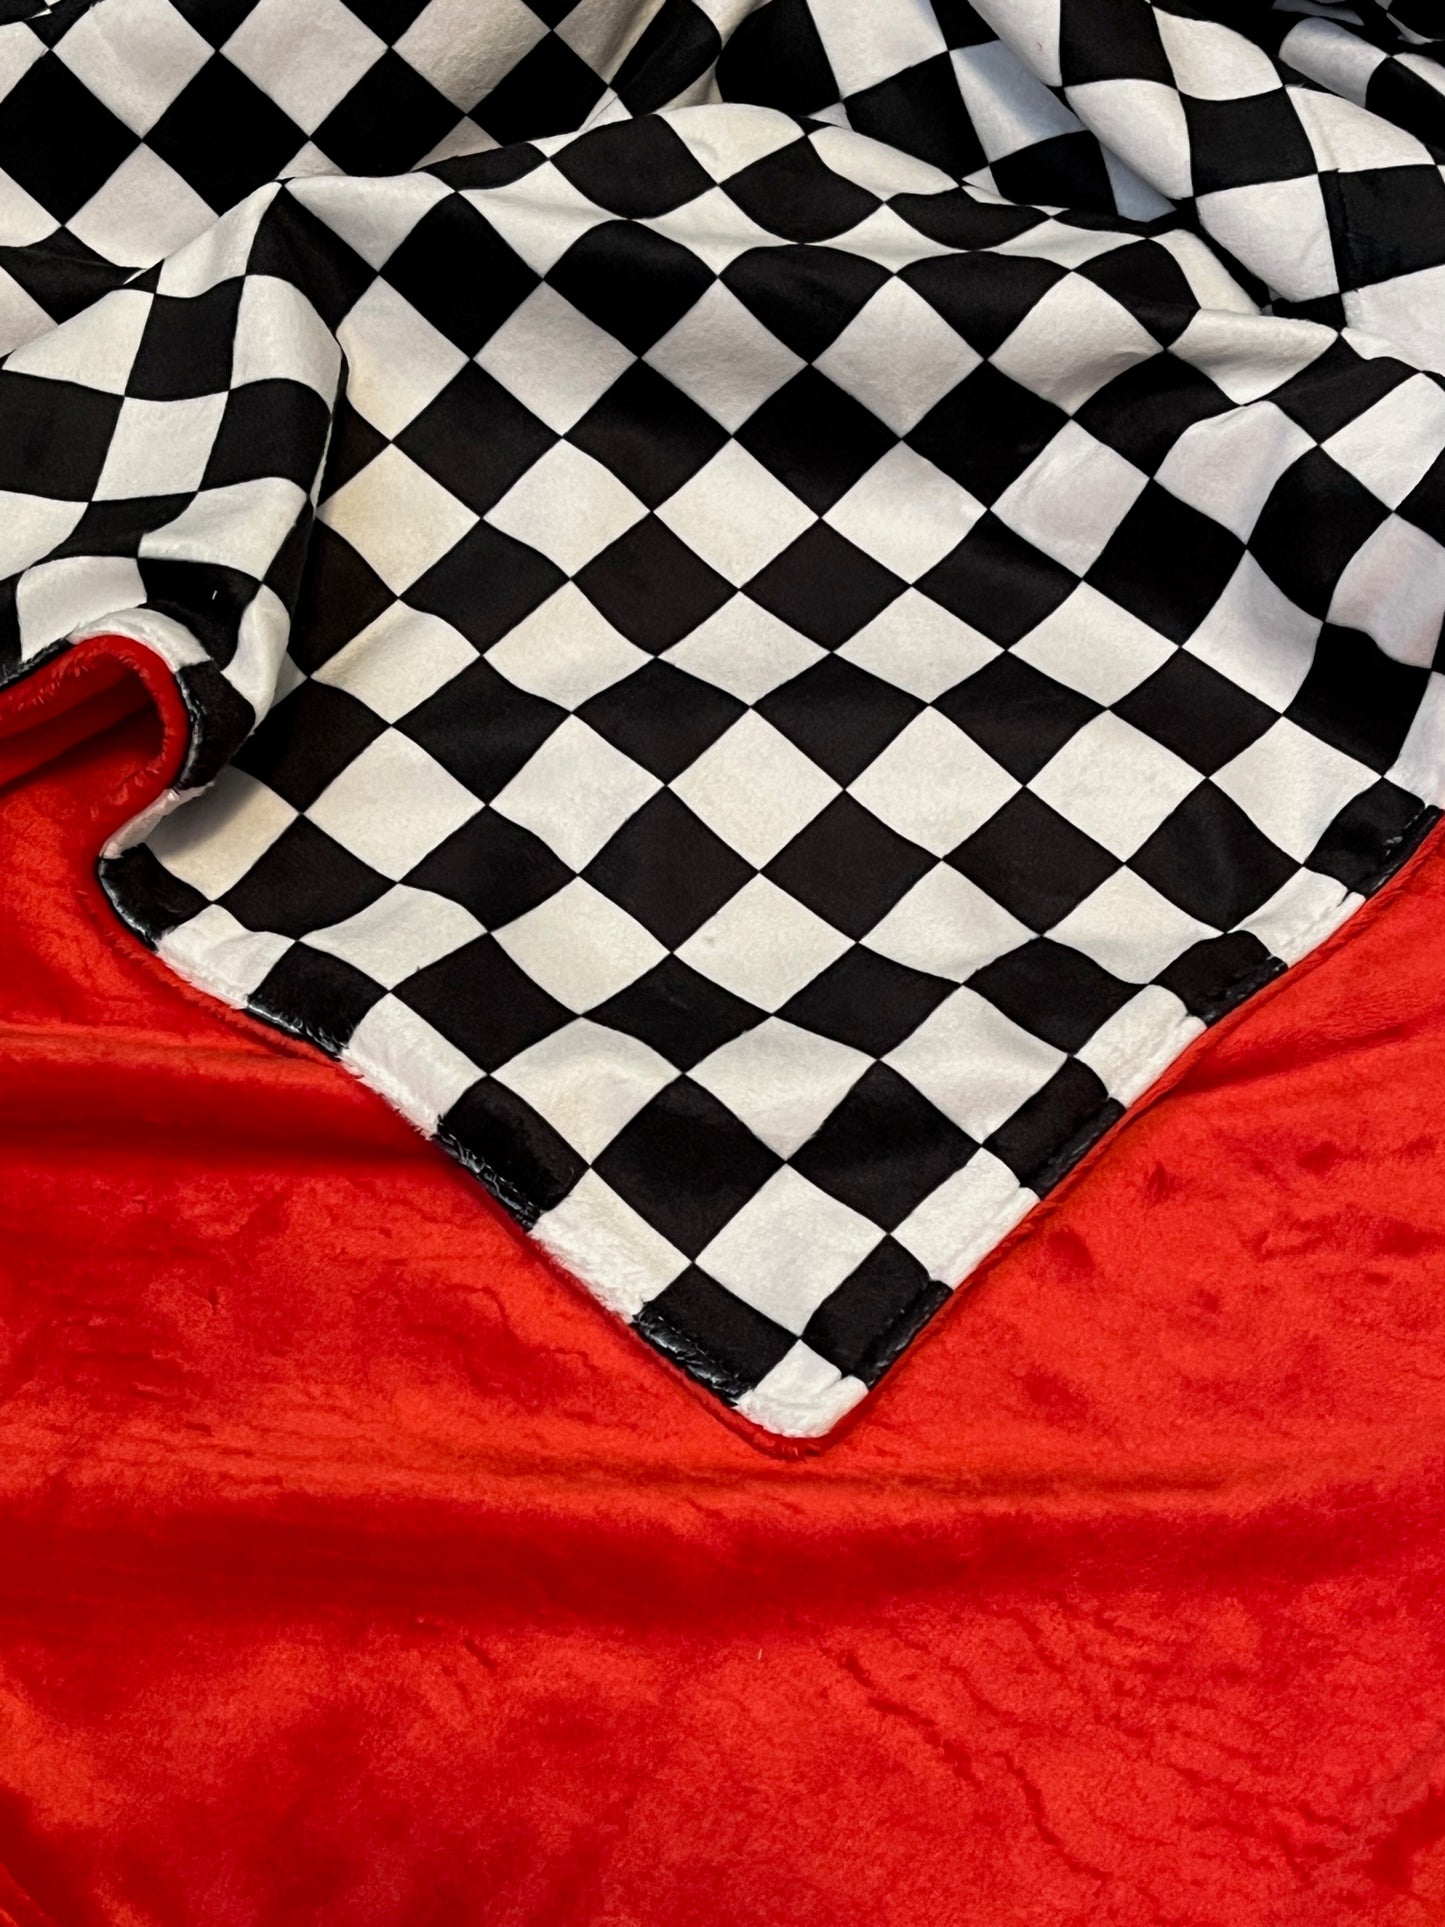 racing check throw blanket shown in red minky